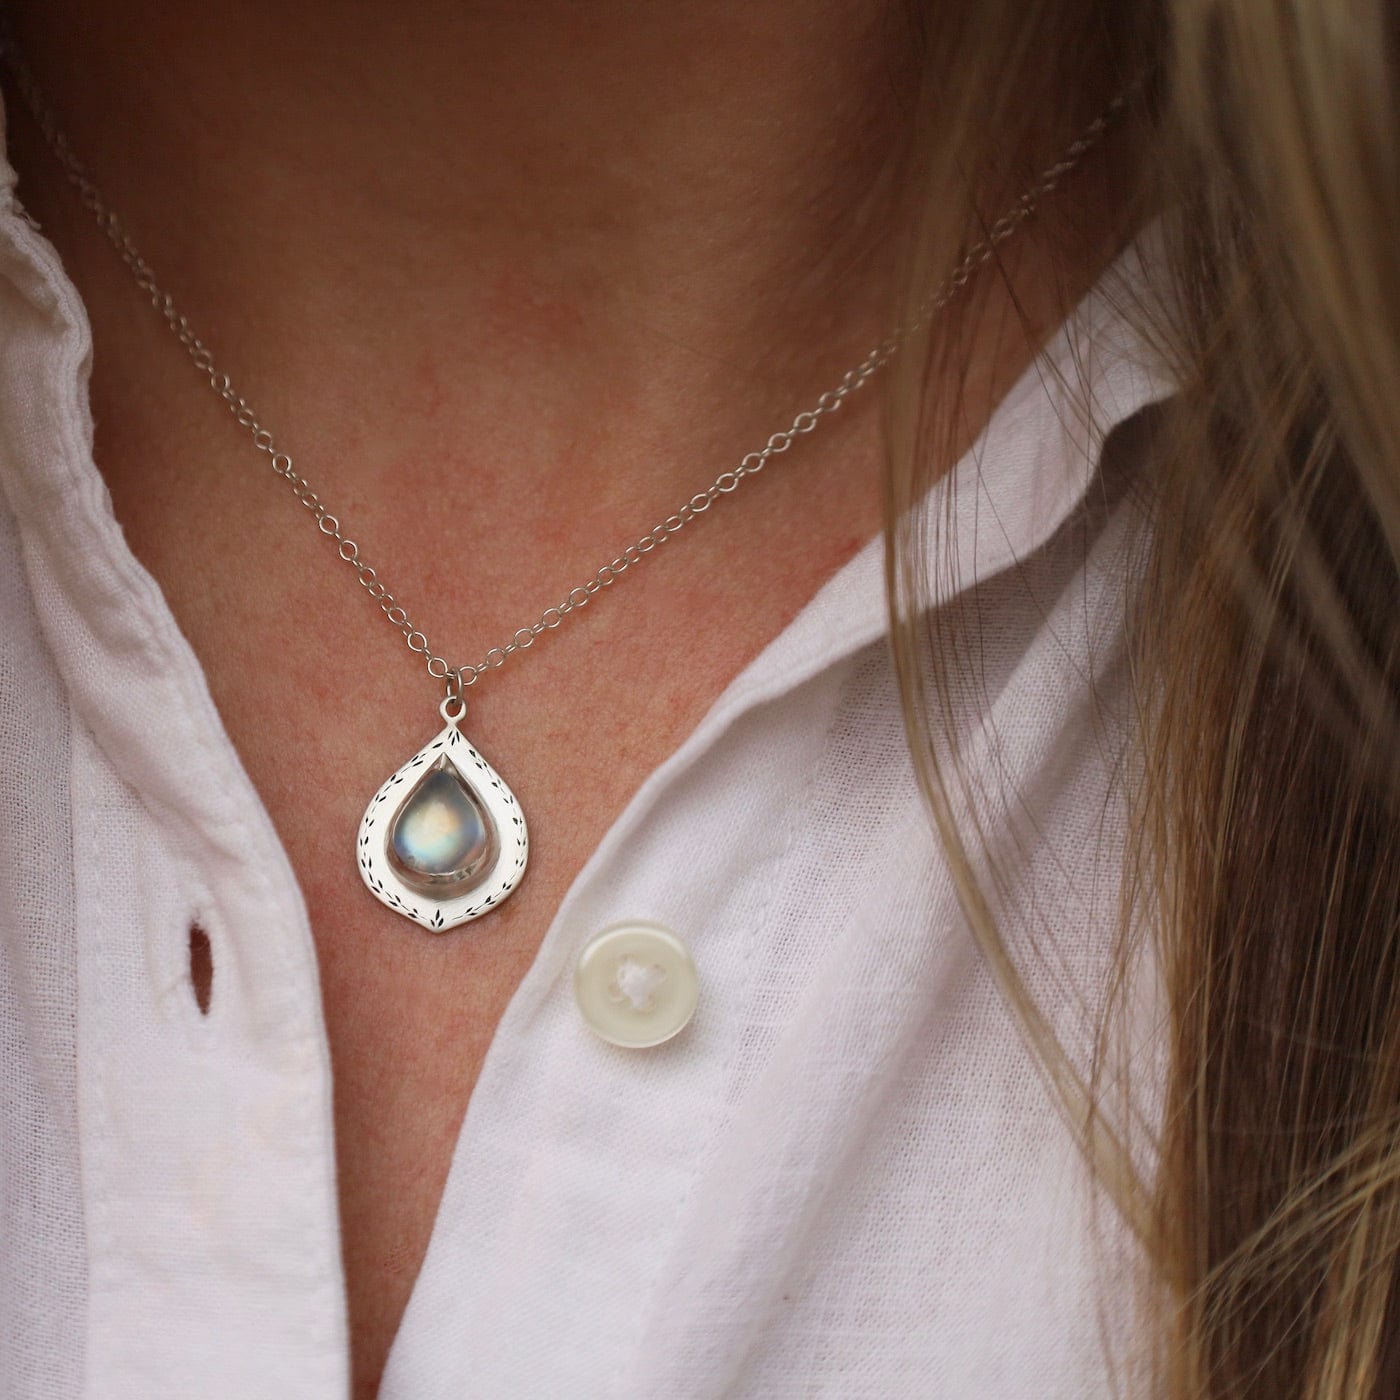 NKL Moonstone Teardrop of Happiness with Engraving